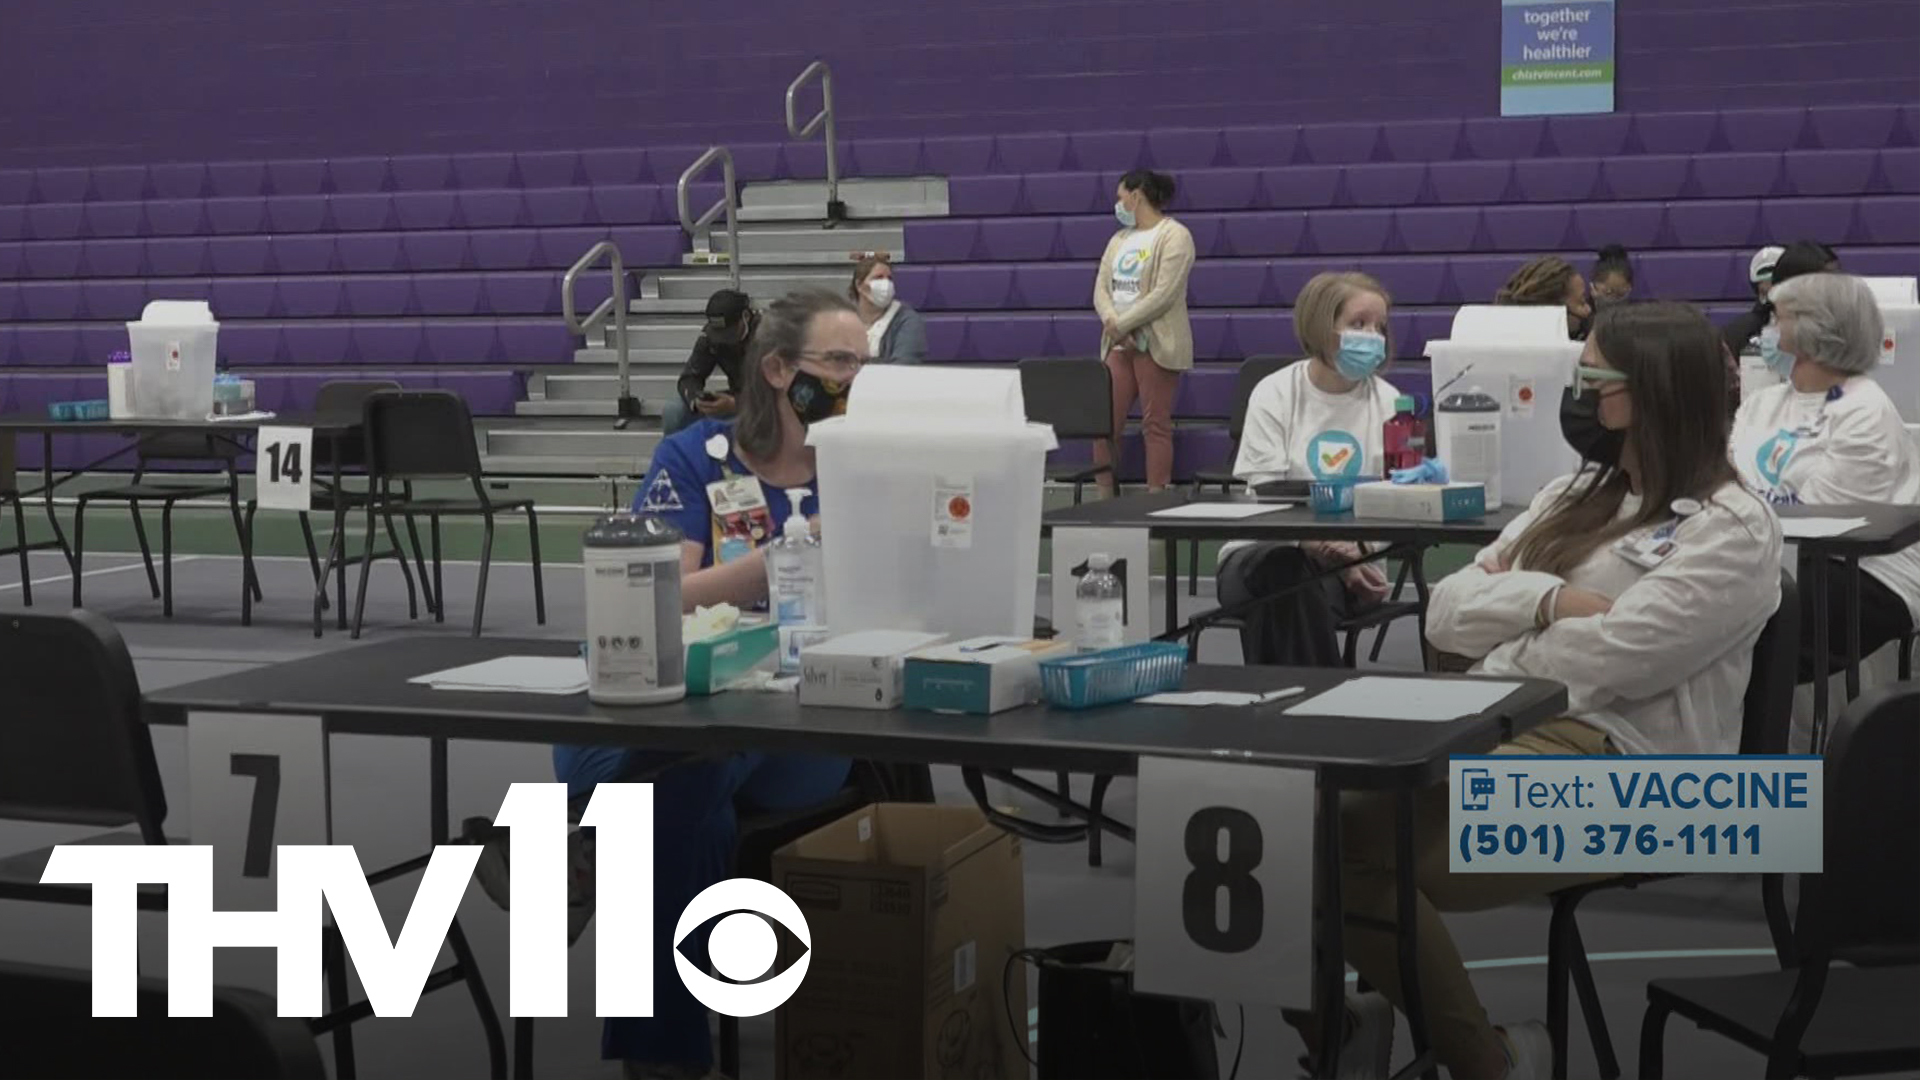 Free vaccinations were given out in Southwest Little Rock in an attempt to reach under-resourced communities.